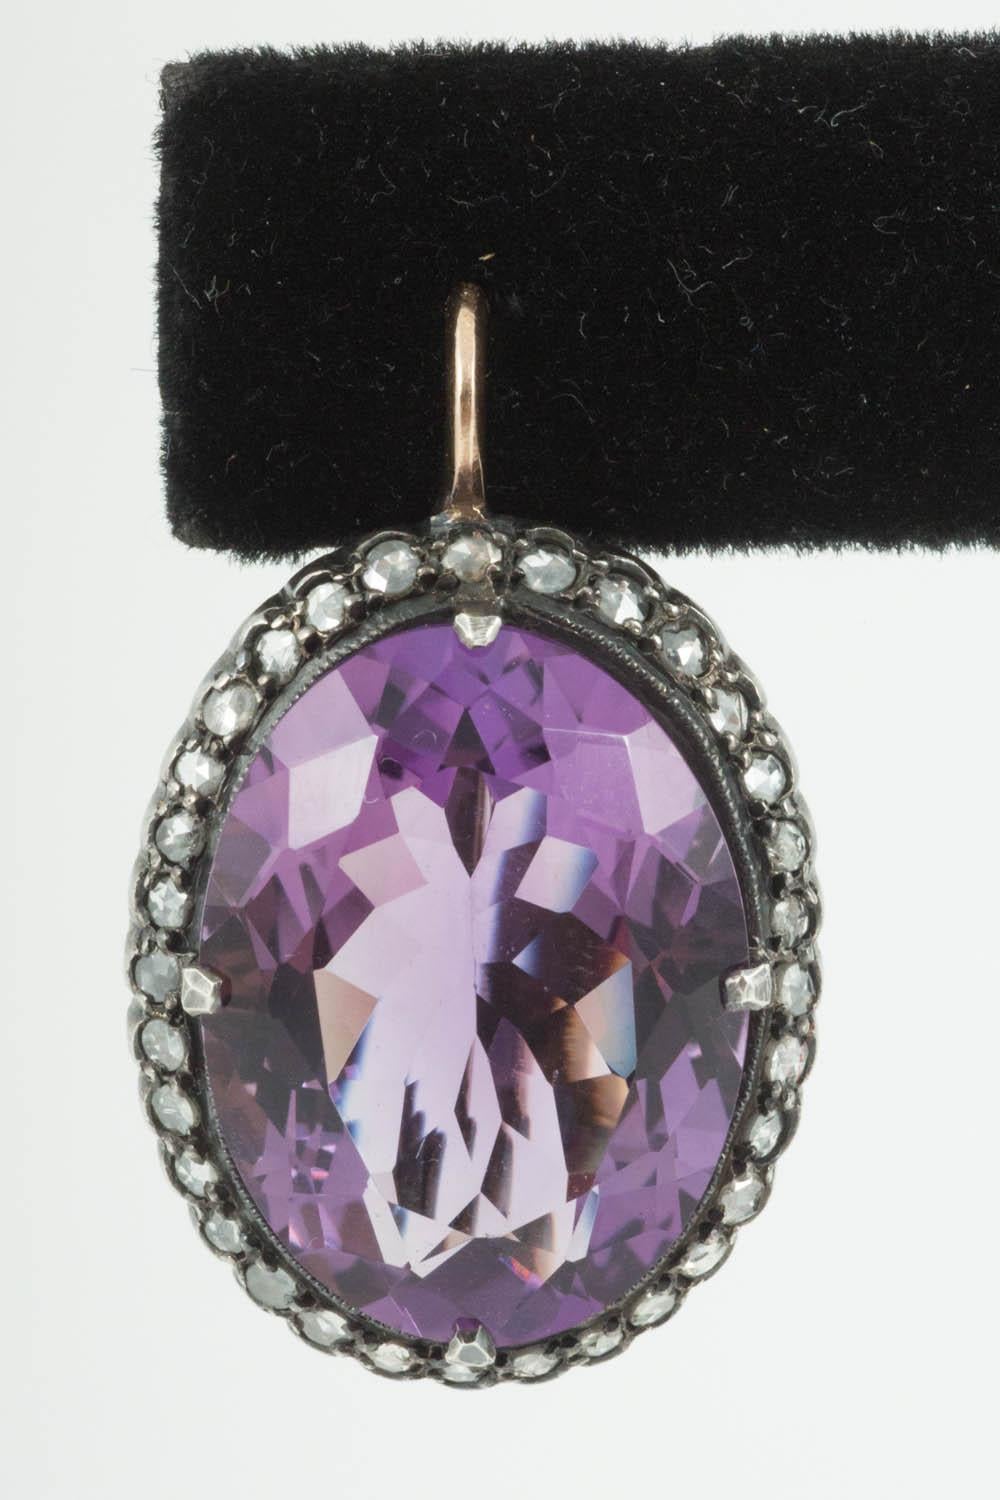 A pair of large oval Amethyst earrings of bright,siberian colour,with a surround of rose cut diamonds,mounted in silver and gold.Russian 56 mark stamped on the original ear fittings.Circa 1890